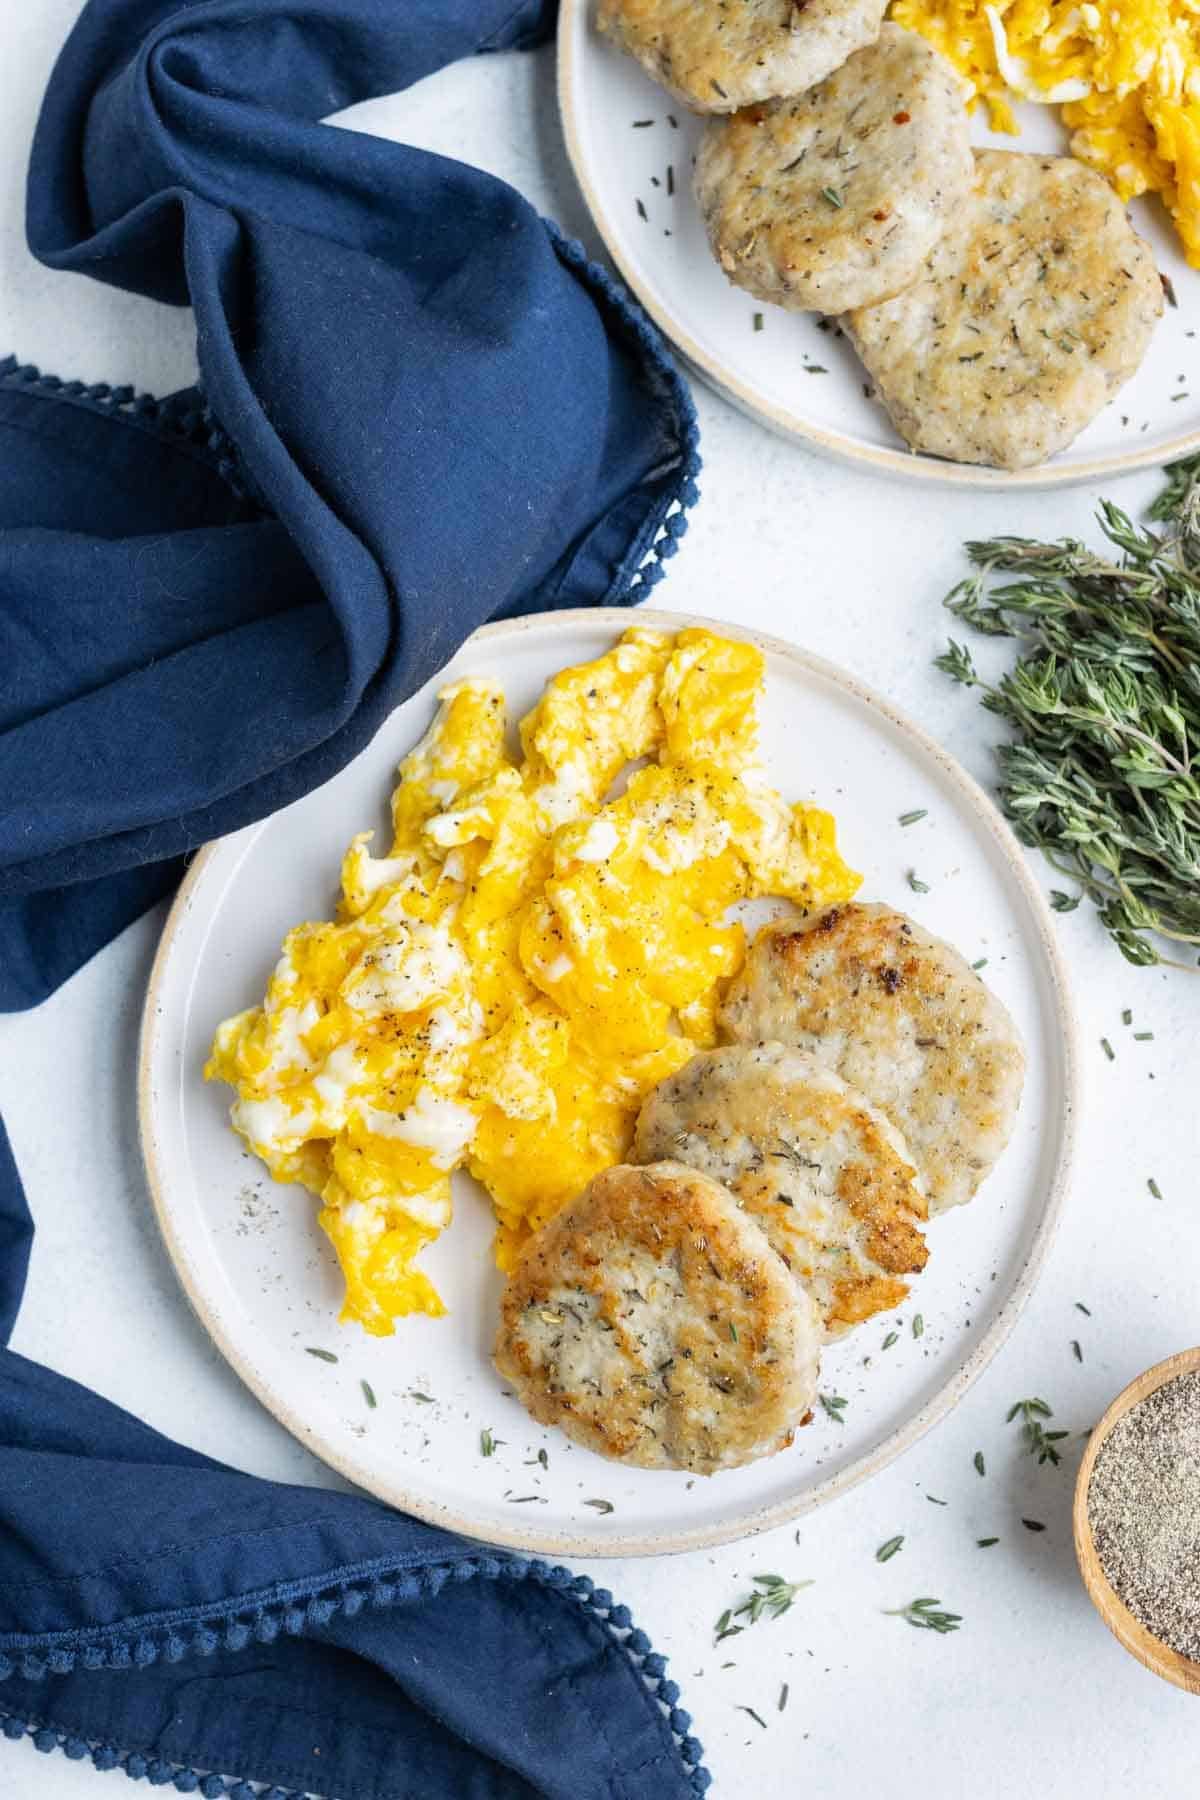 Chicken sausage patties are part of a healthy breakfast.